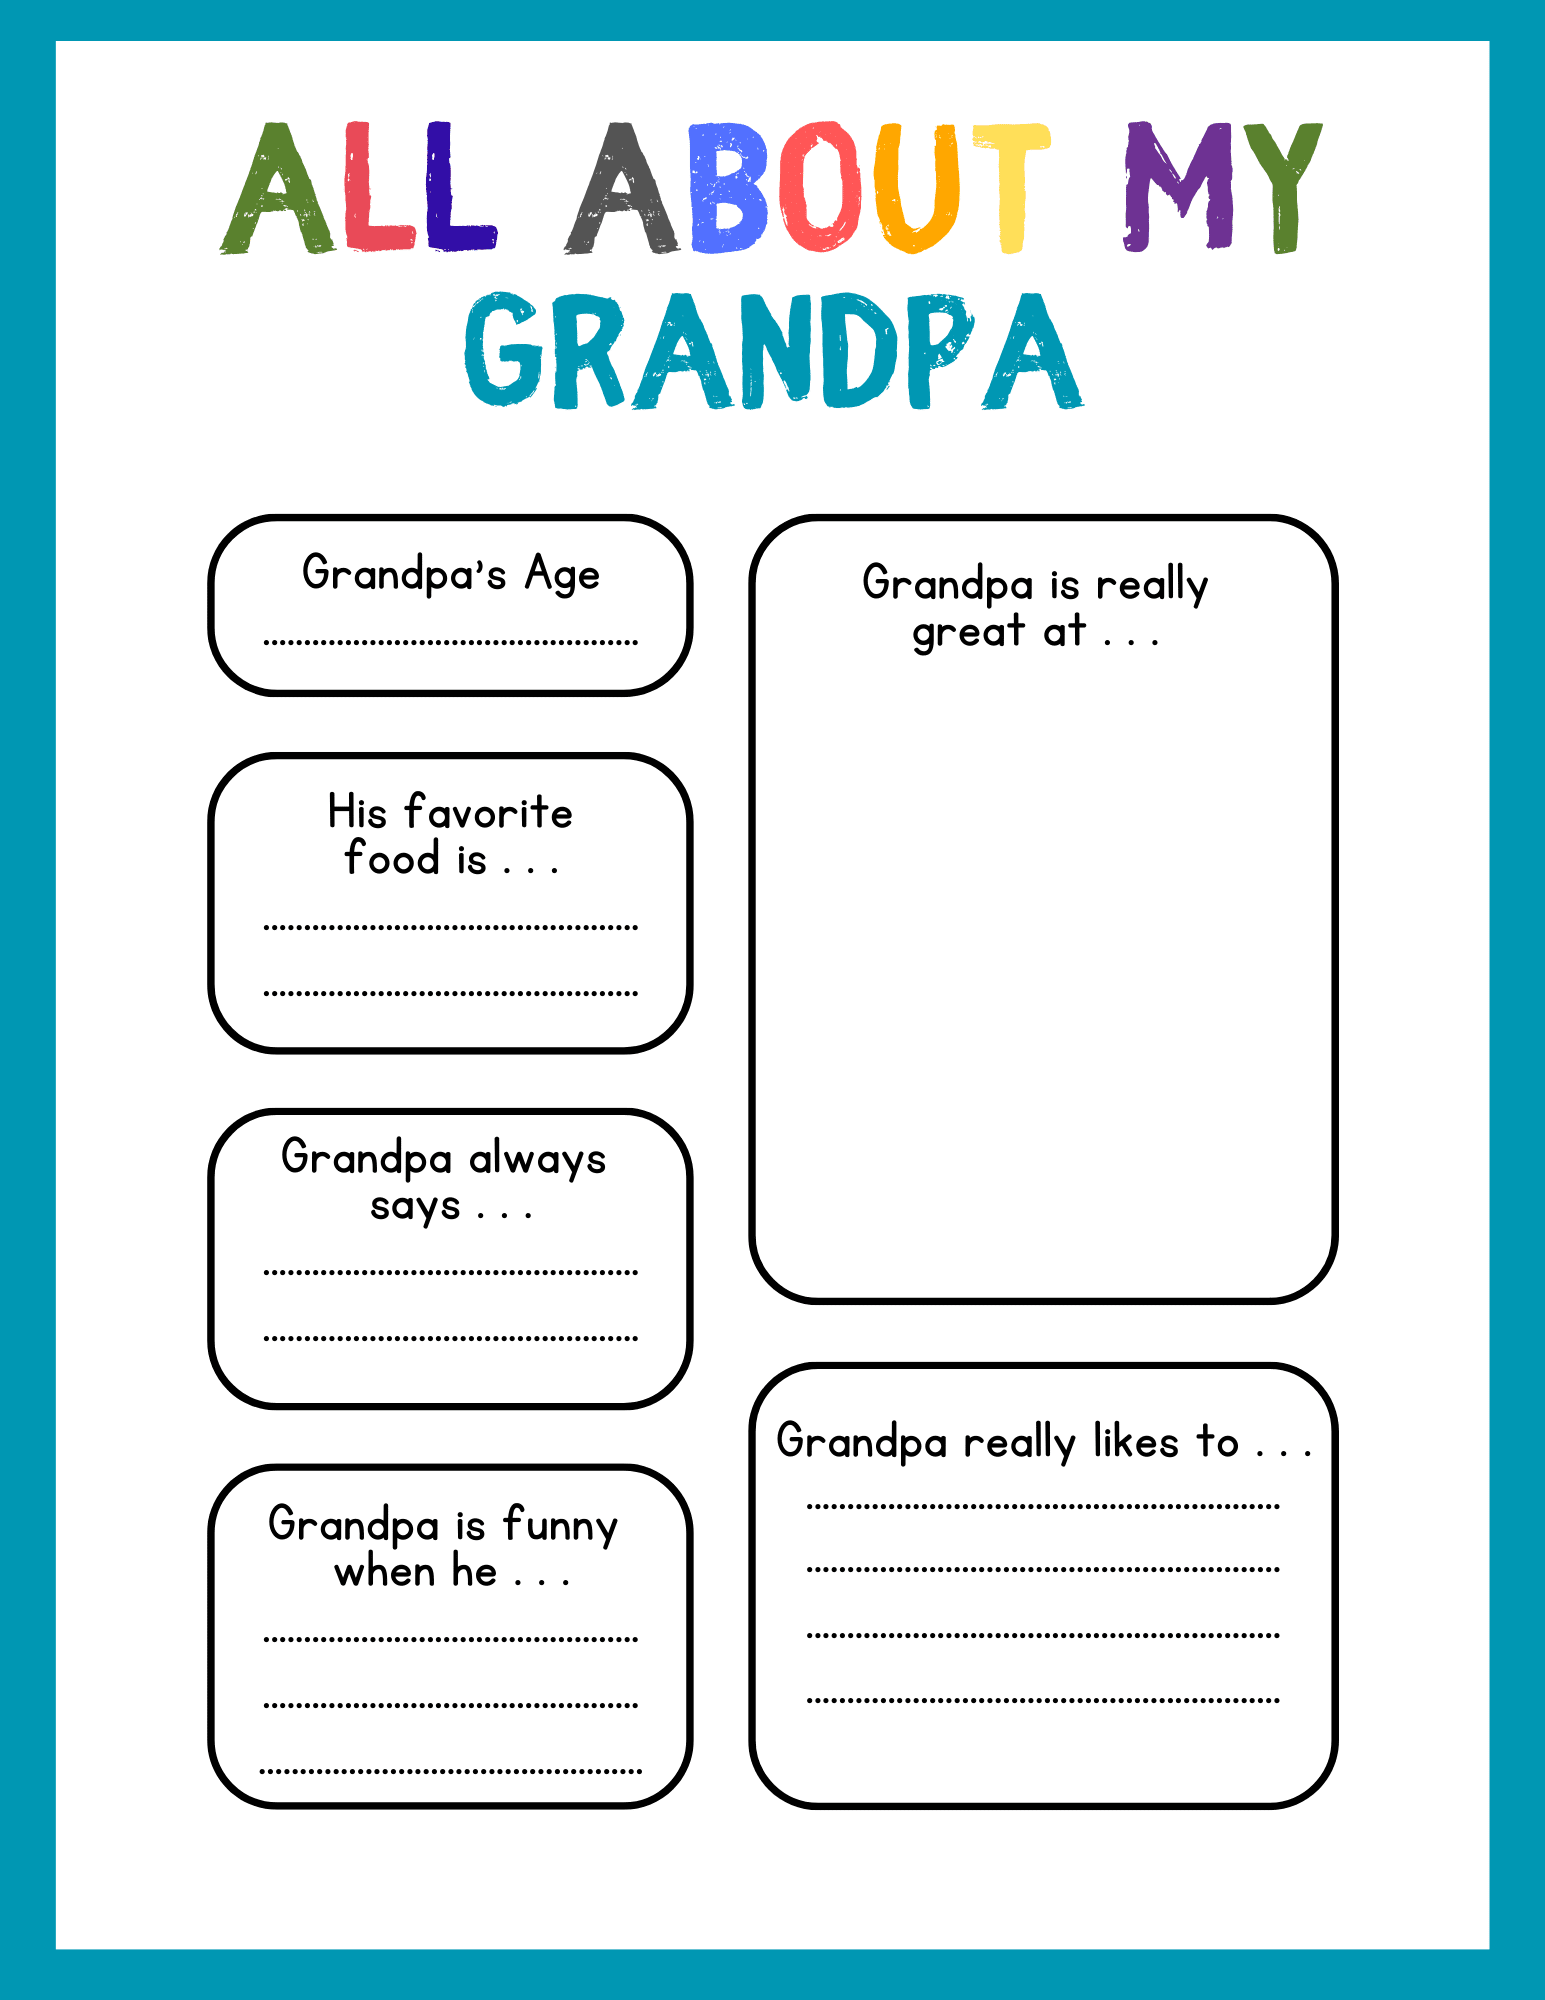 all-about-grandpa-printable-24hourfamily